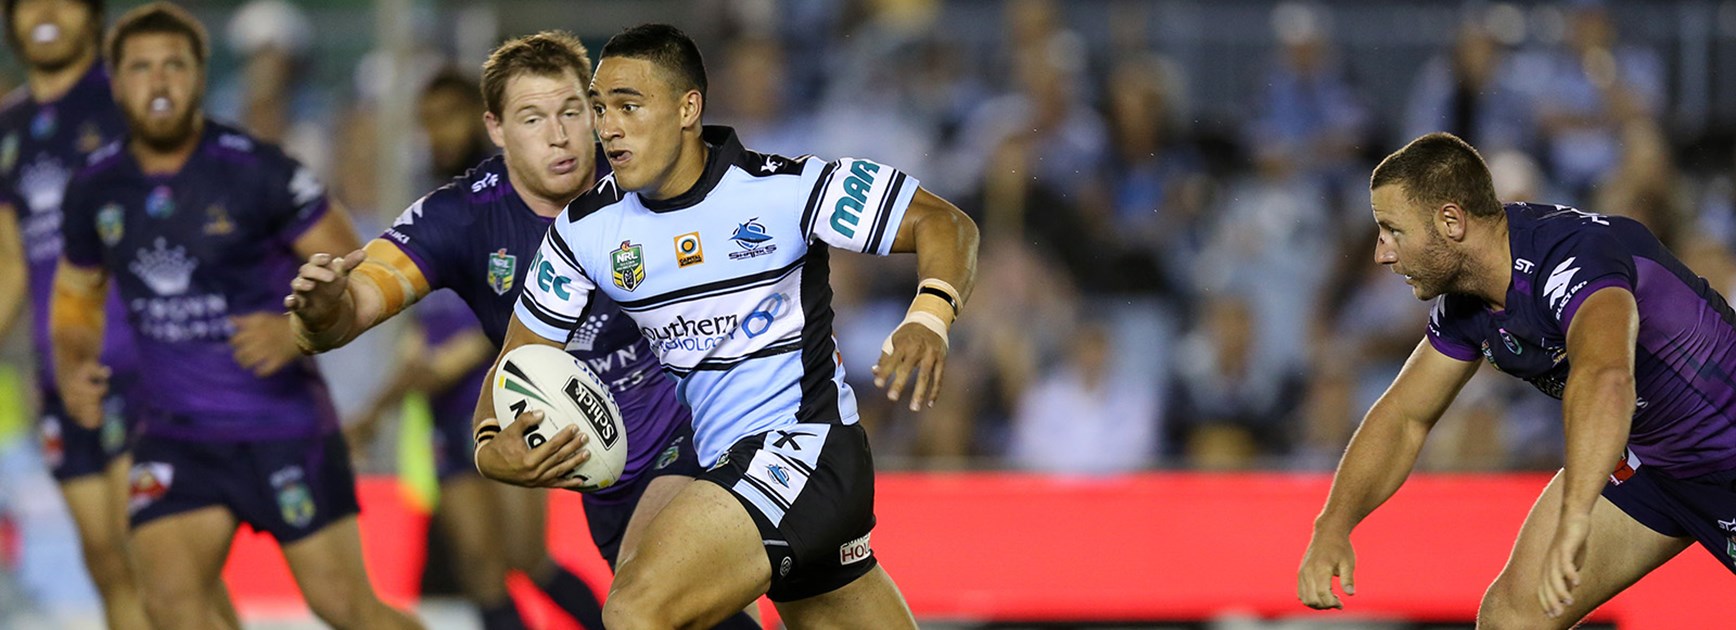 Sharks winger Valentine Holmes makes a break against the Storm in Round 4 of the Telstra Premiership.